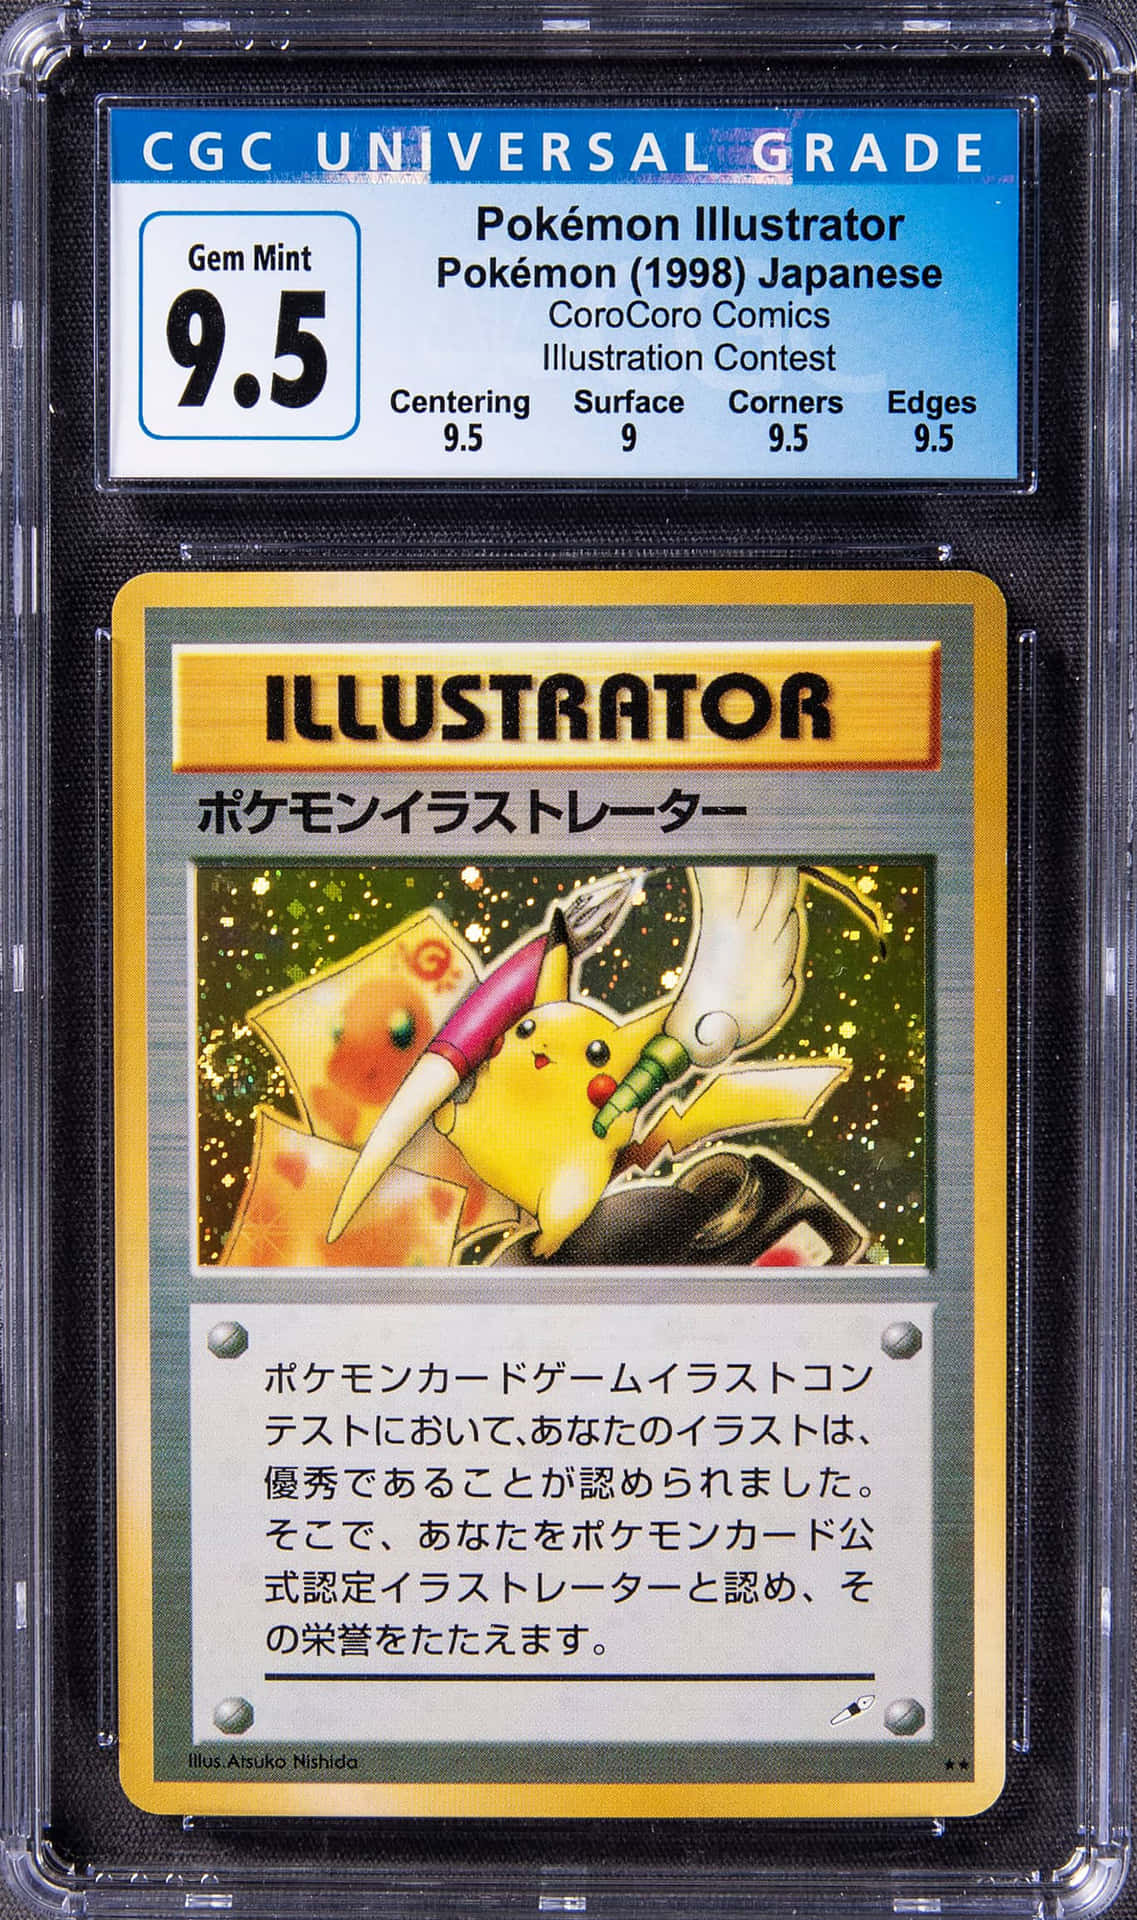 Collect the Best Pokemon Cards!